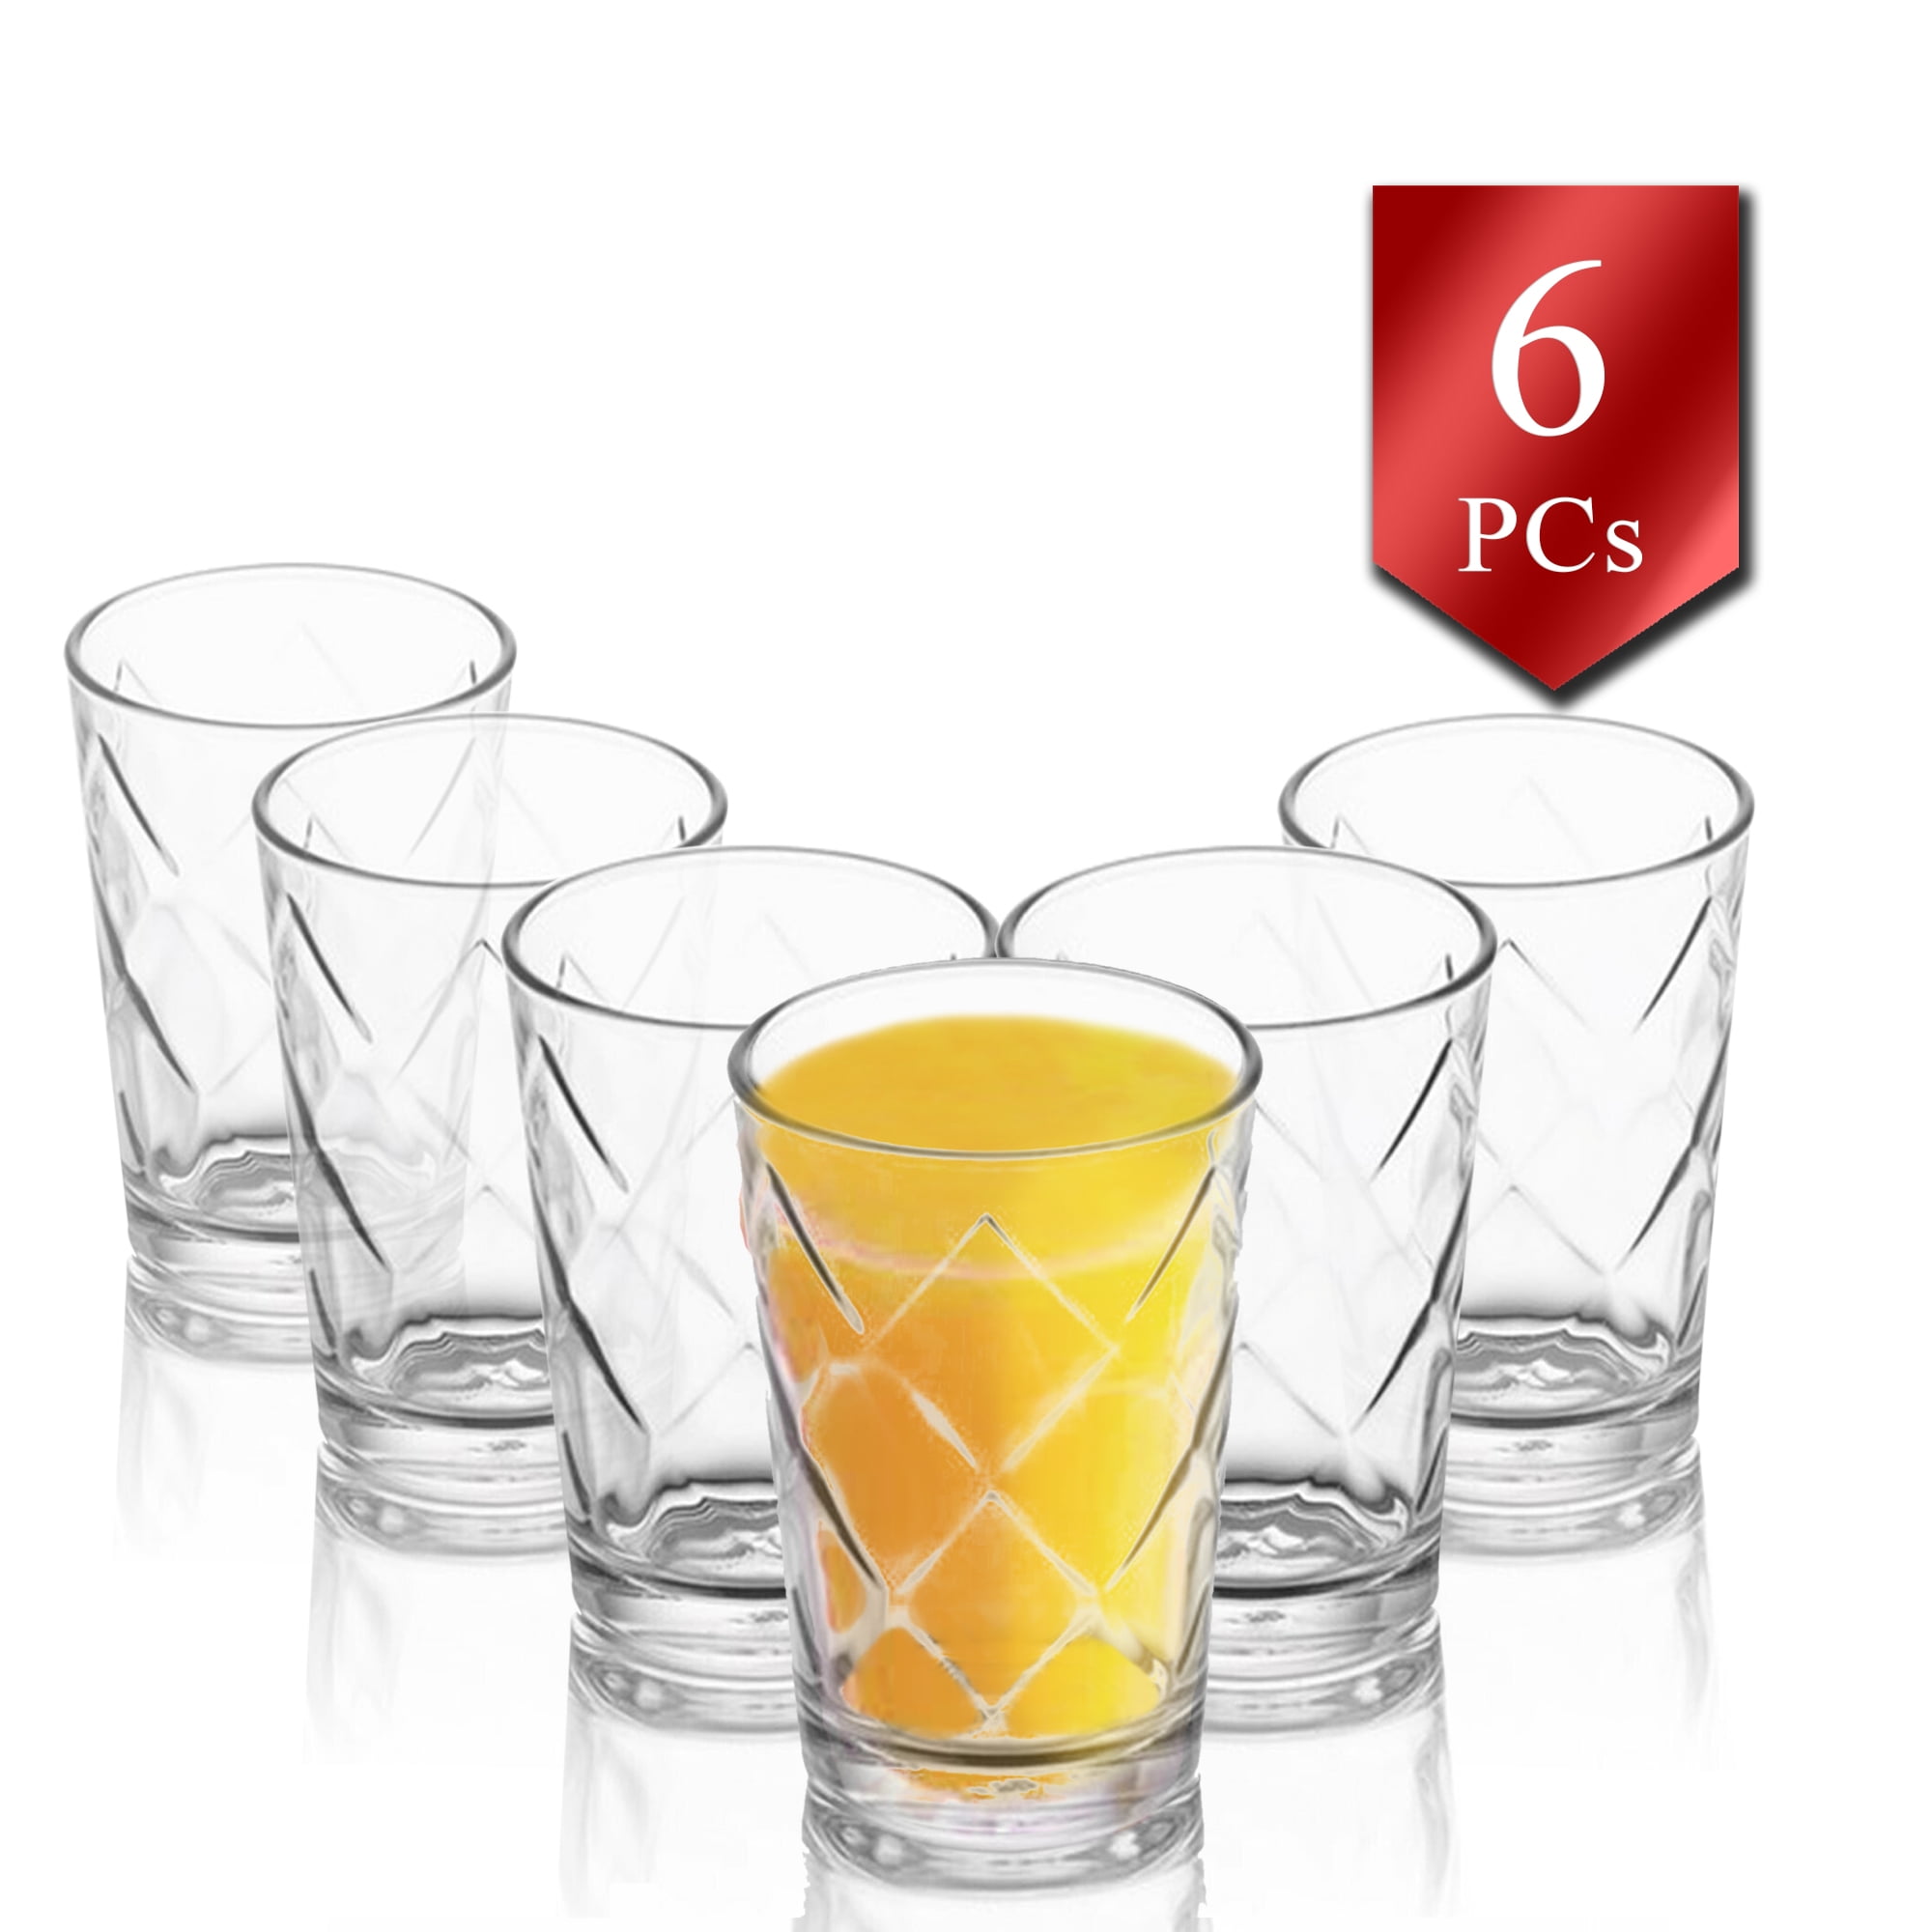 Heavy Base Tumbler Beverage Ice Tea Cups 7 oz Home & Kitchen Entertainment Glassware for Water Clear Whiskey Bar Decor Huge Set of 10 Circleware 40117 Matrix Juice Drinking Glasses Beer